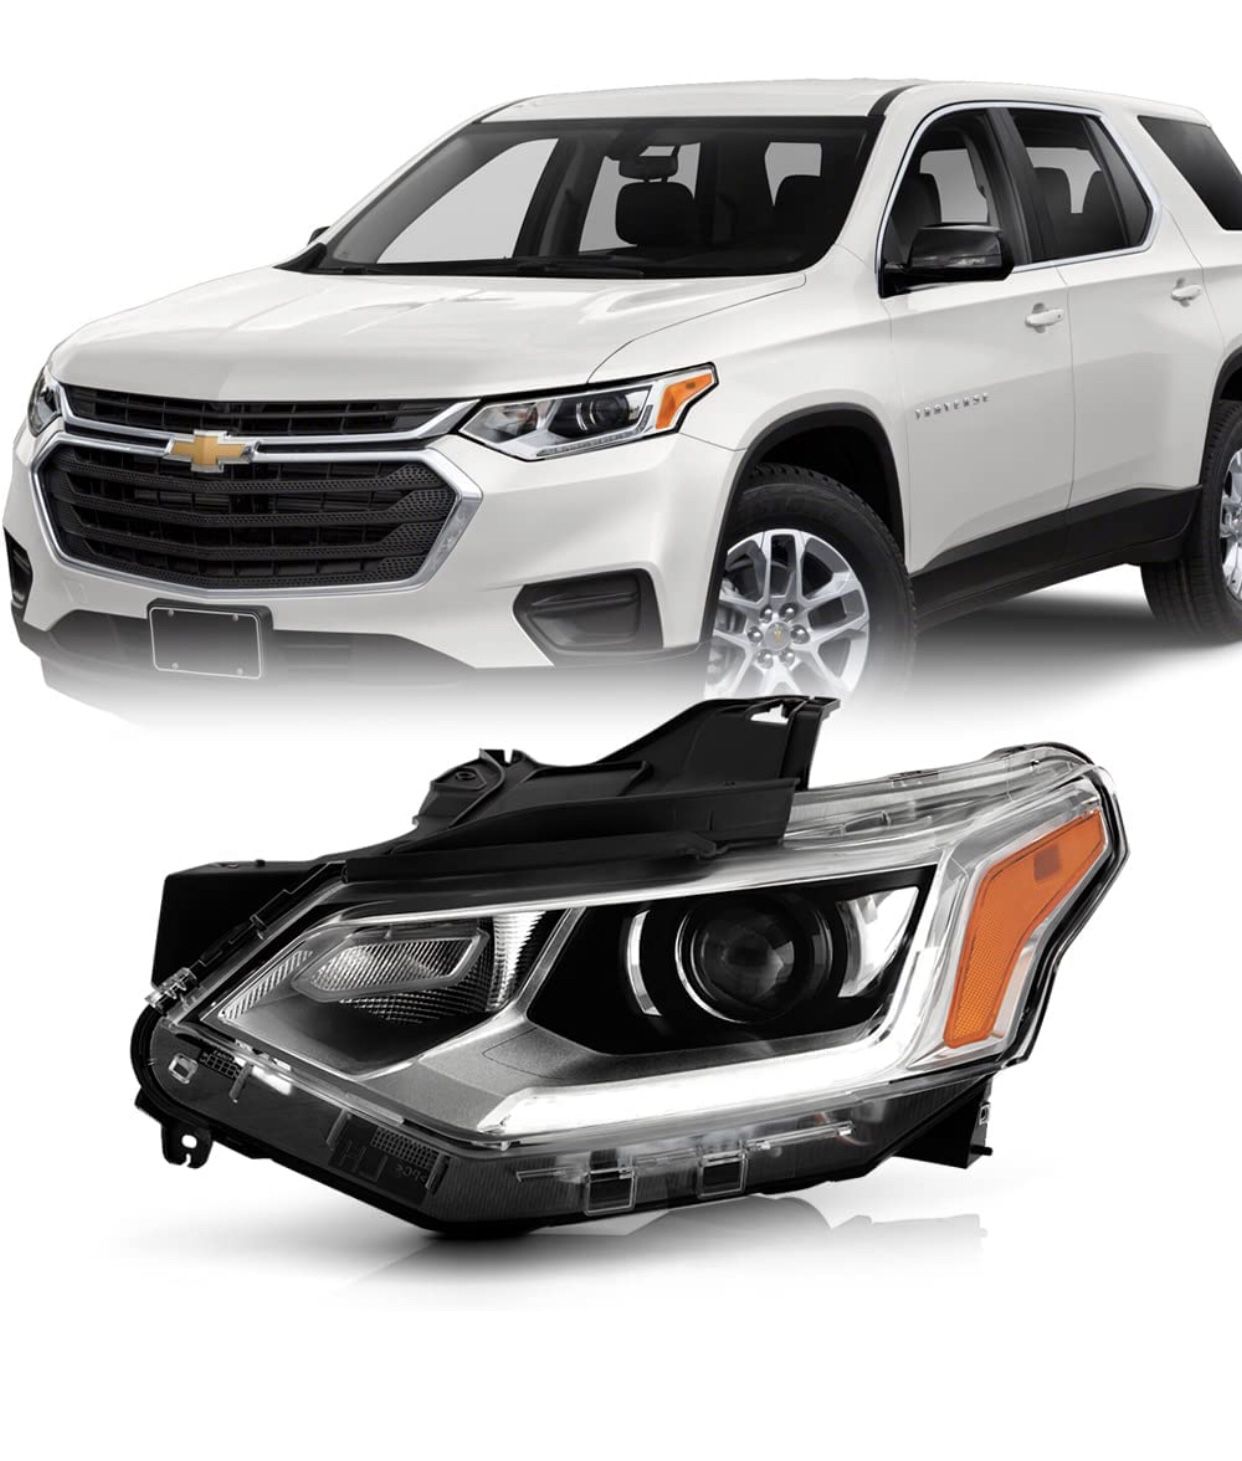 For [HID/Xenon Model] 2018-2020 Chevy Traverse LED DRL Projector Headlight Headlamp Replacement Driver Side